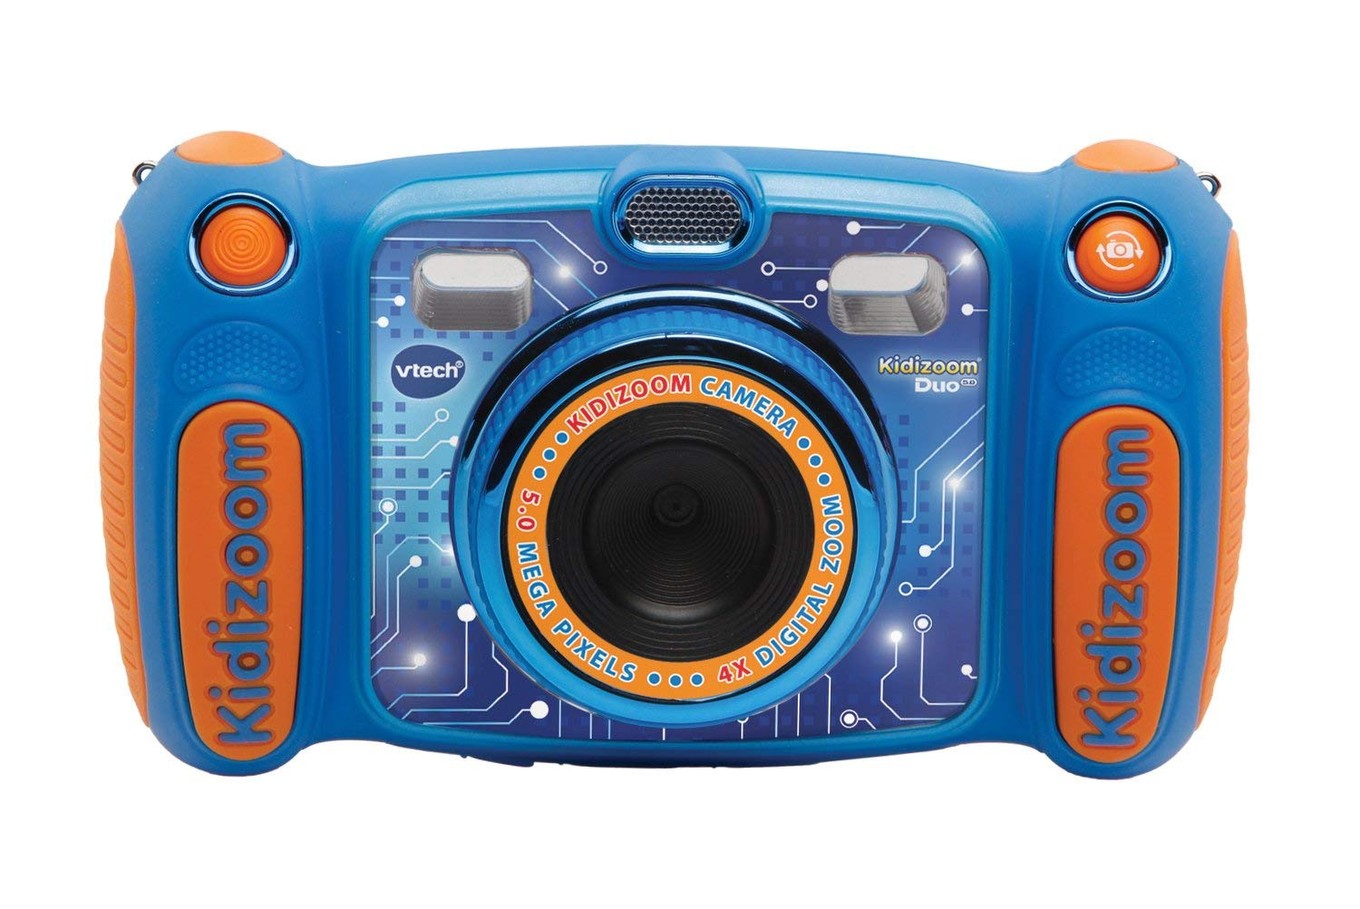  VTech Kidizoom Duo 5.0 Deluxe Digital Selfie Camera with MP3  Player and Headphones, Blue : Electronics